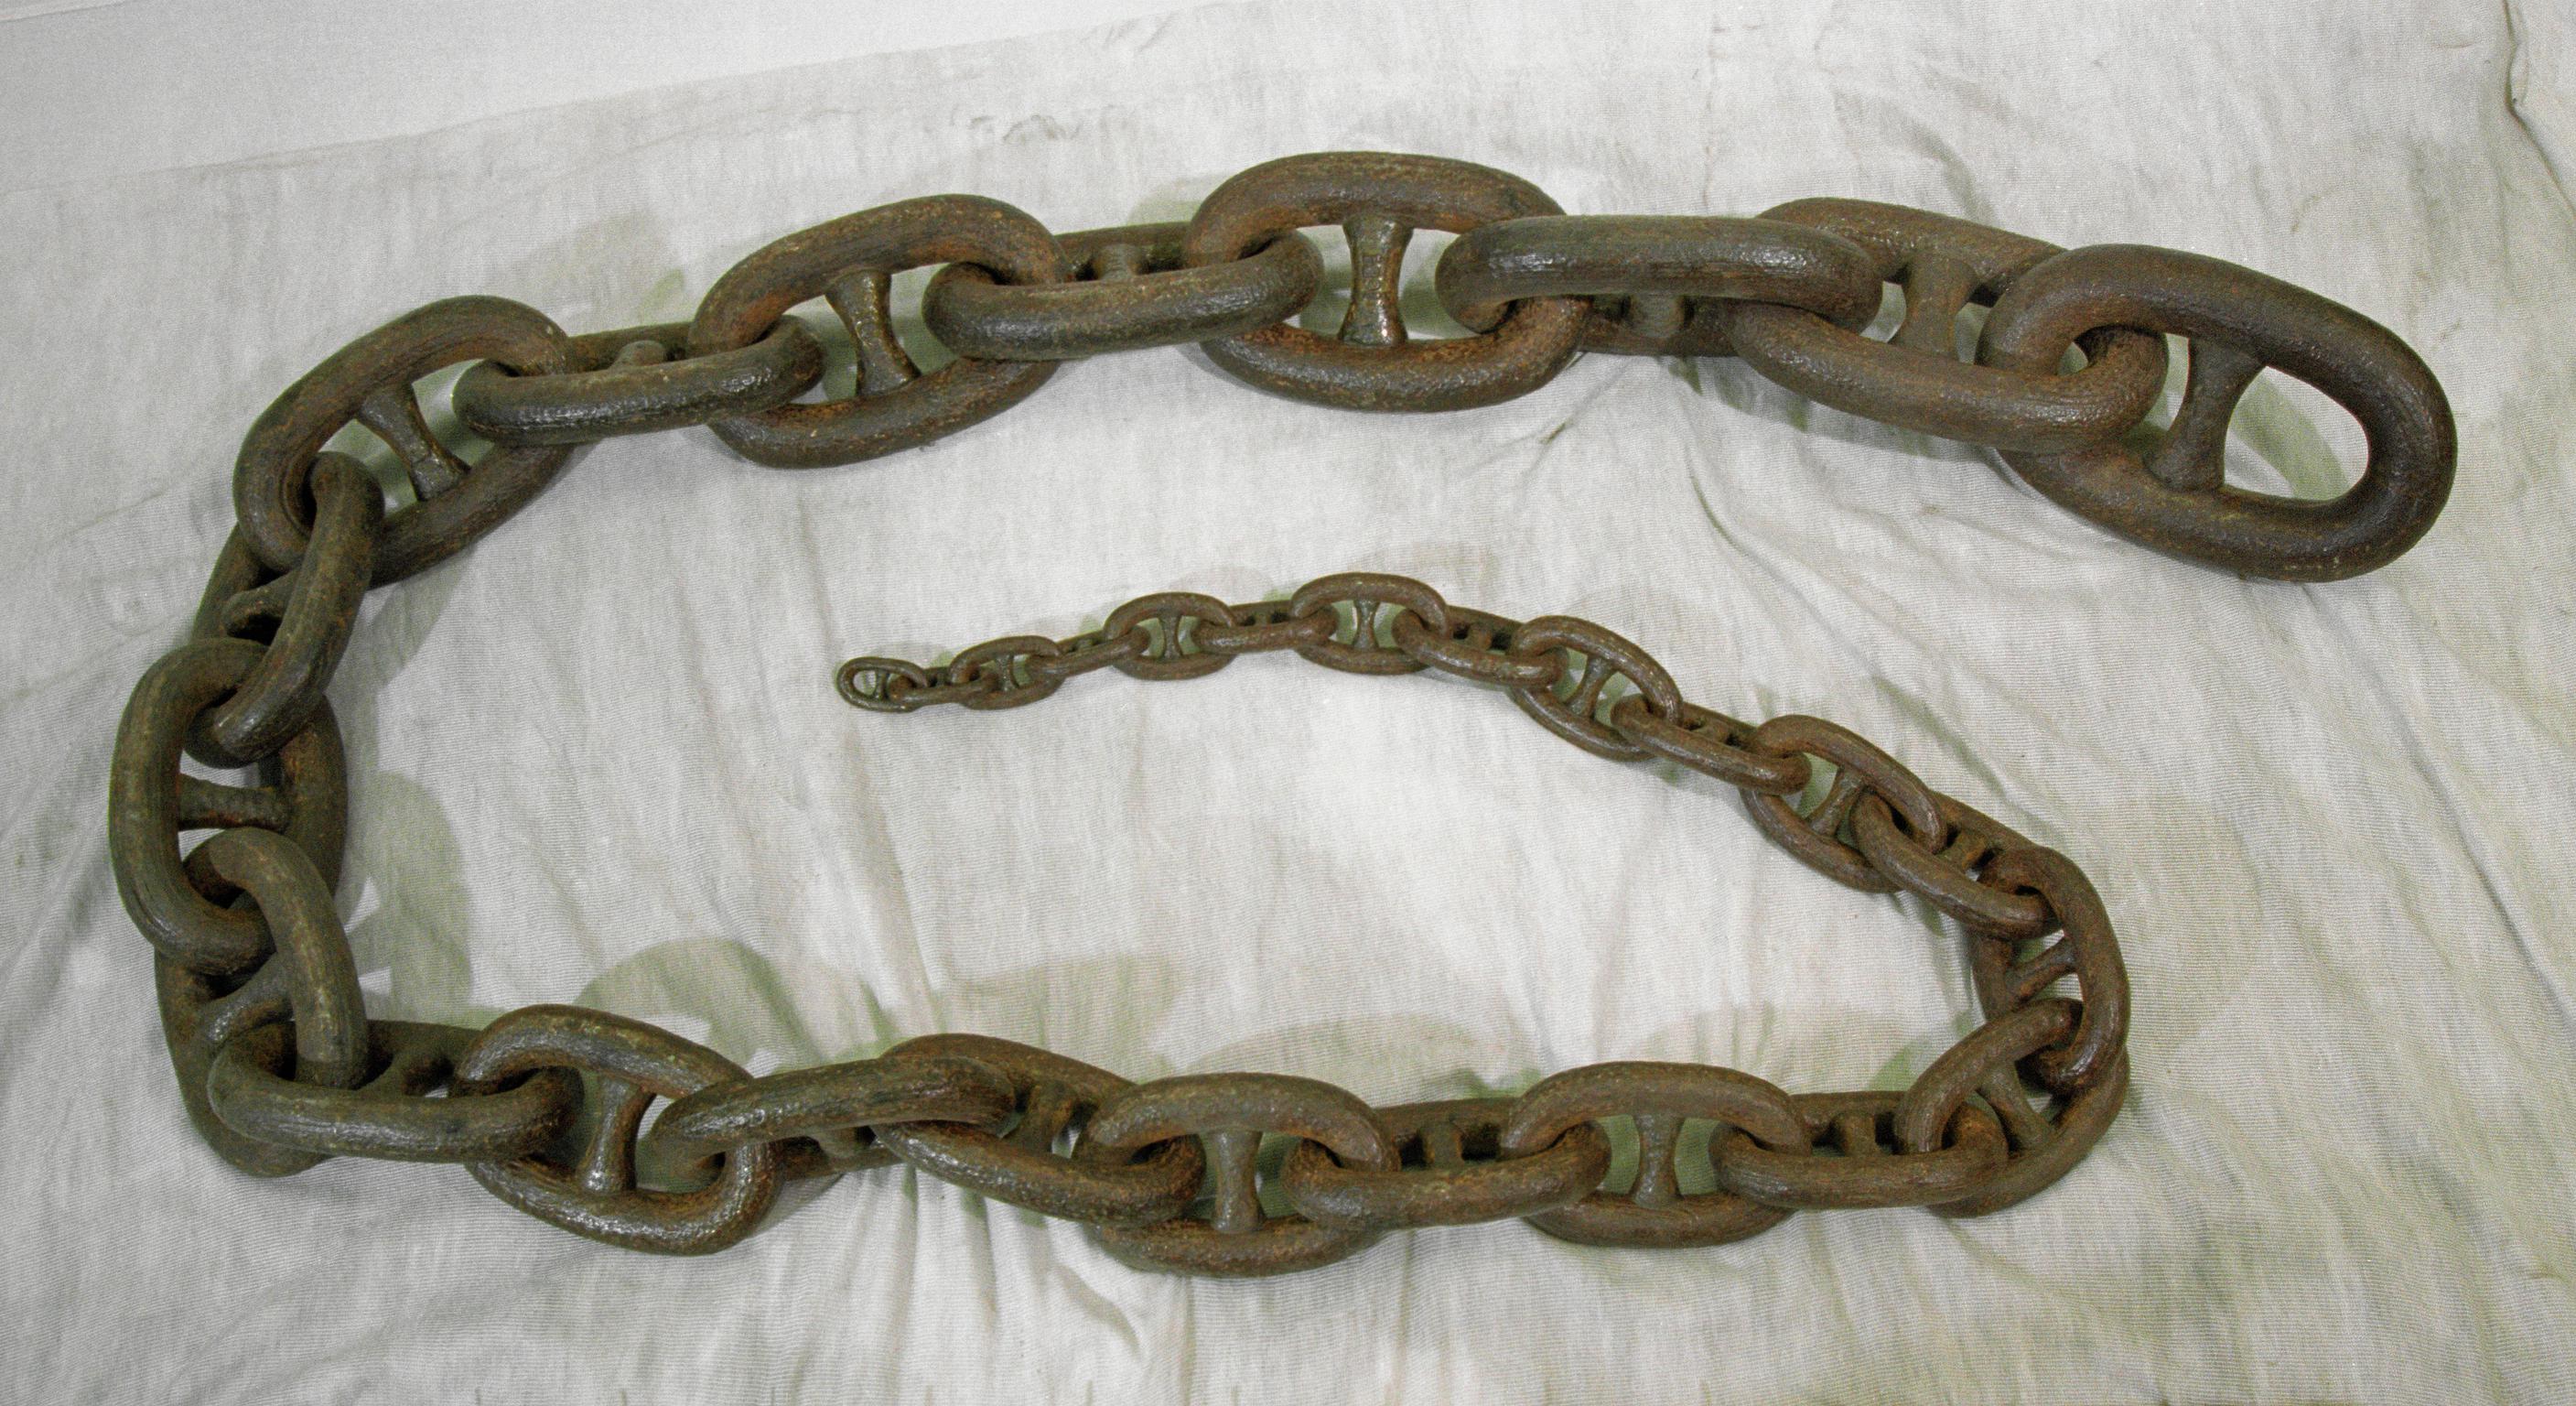 Chain, each link being successively smaller